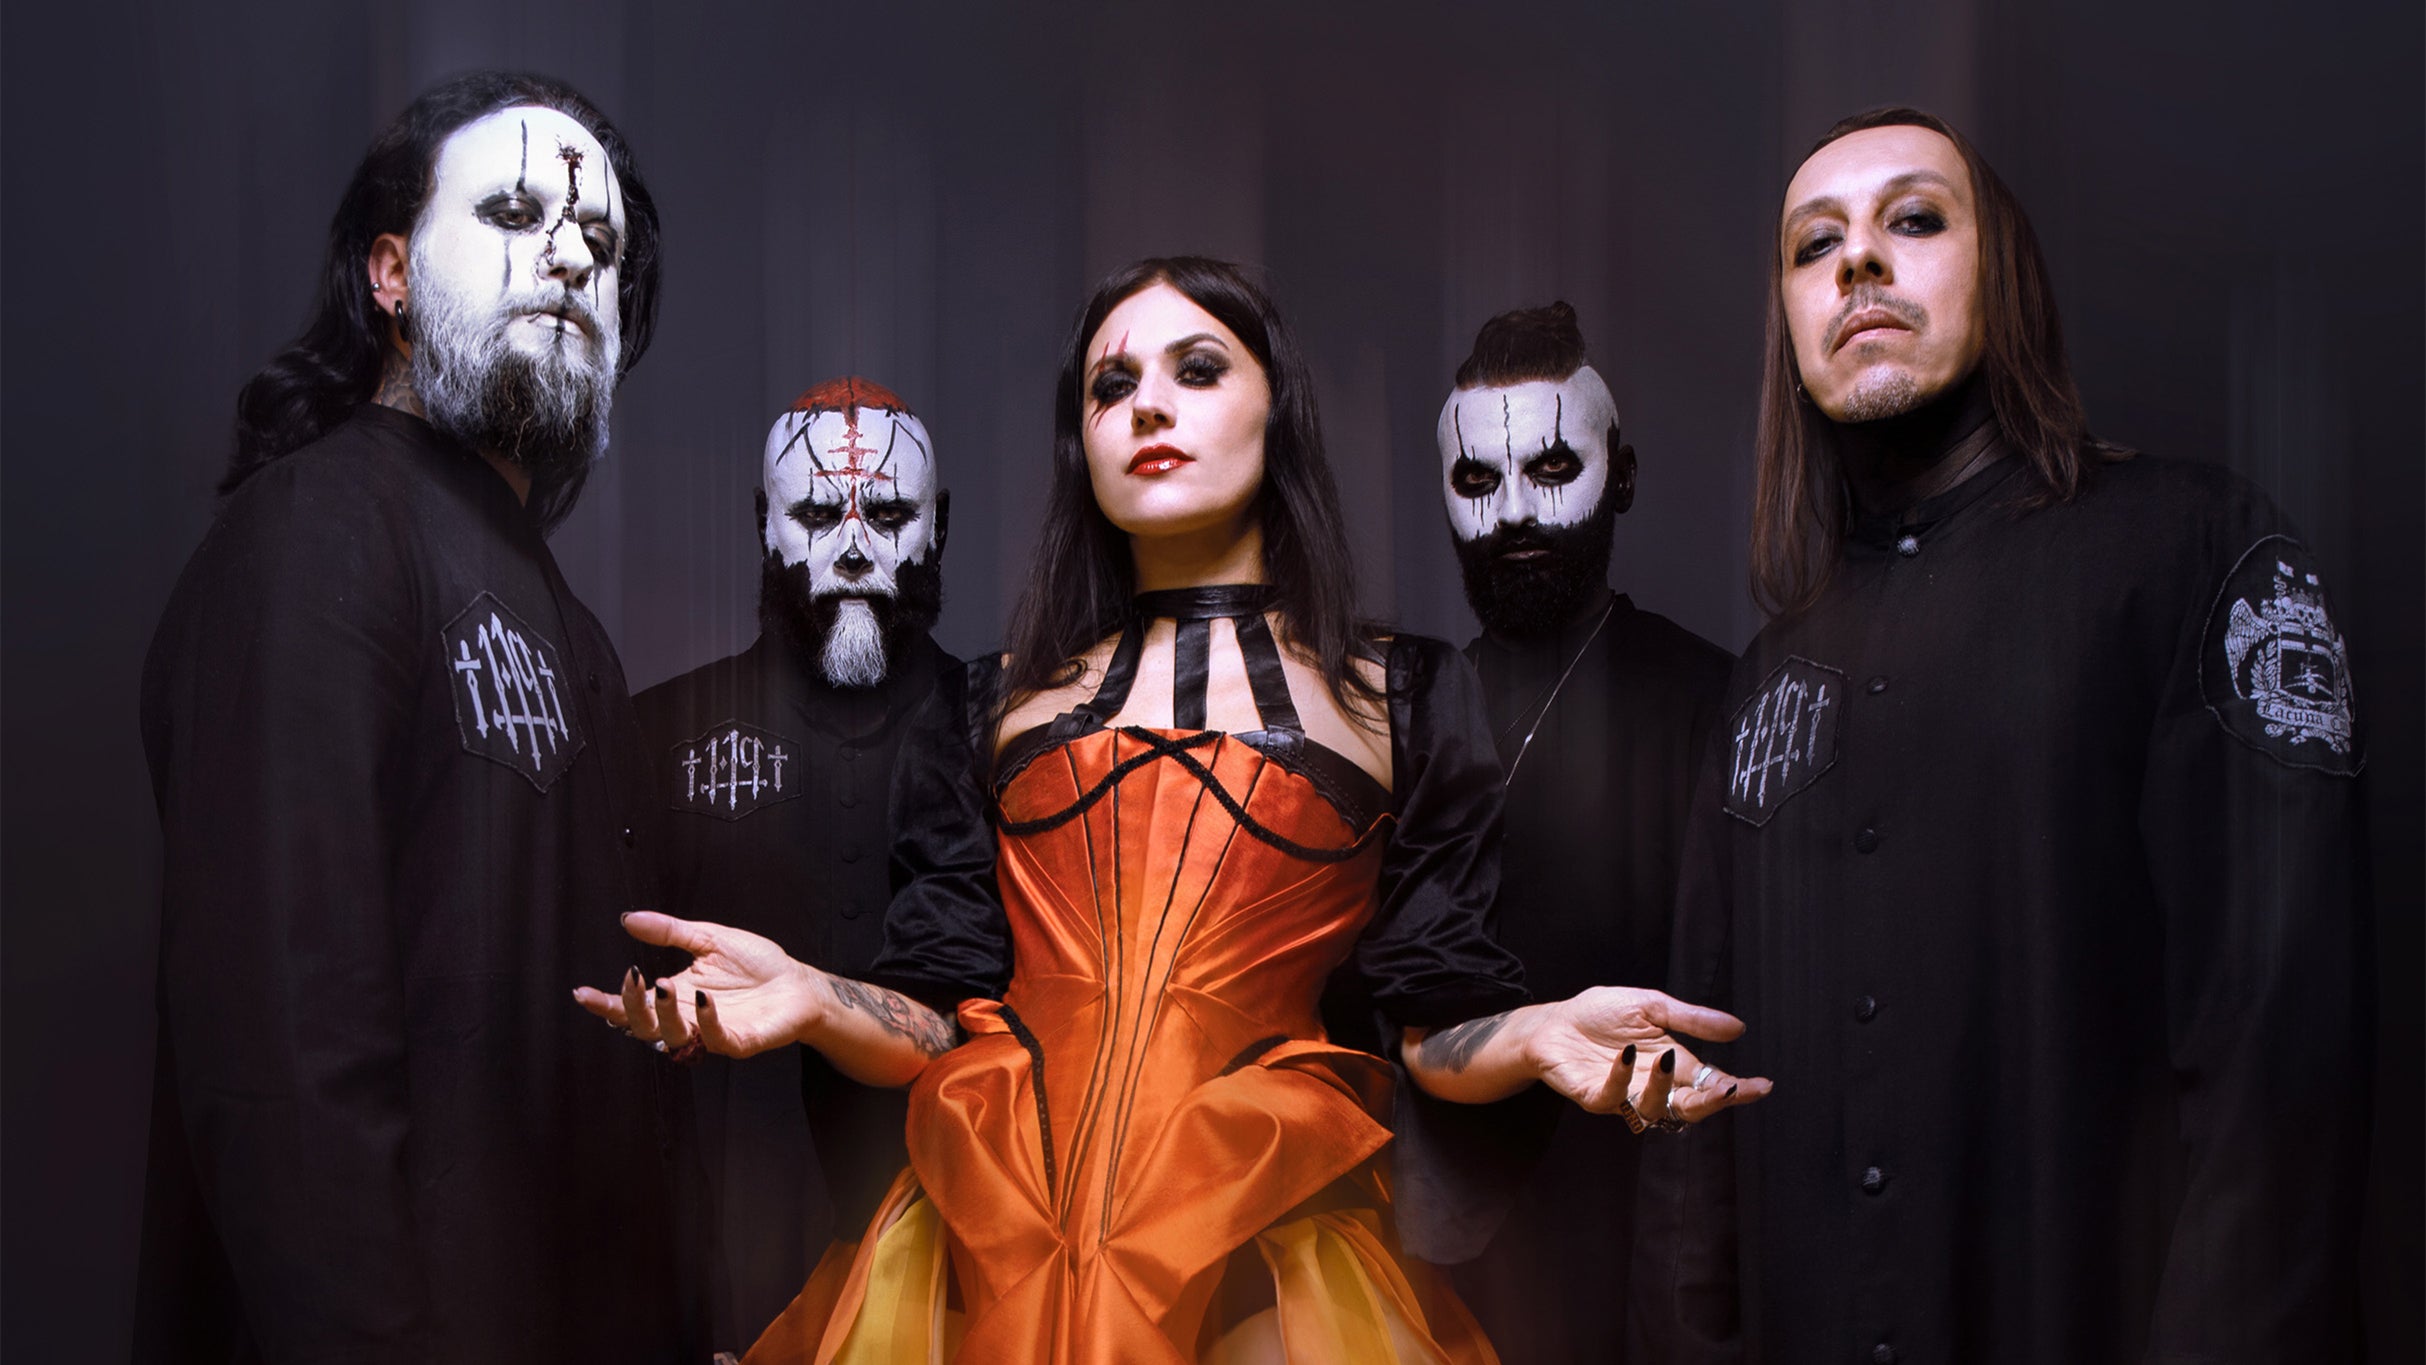 Lacuna Coil  - Ignite The Fire Tour w/ New Year's Day  presale code for event tickets in Fort Smith, AR (Templelive Fort Smith)